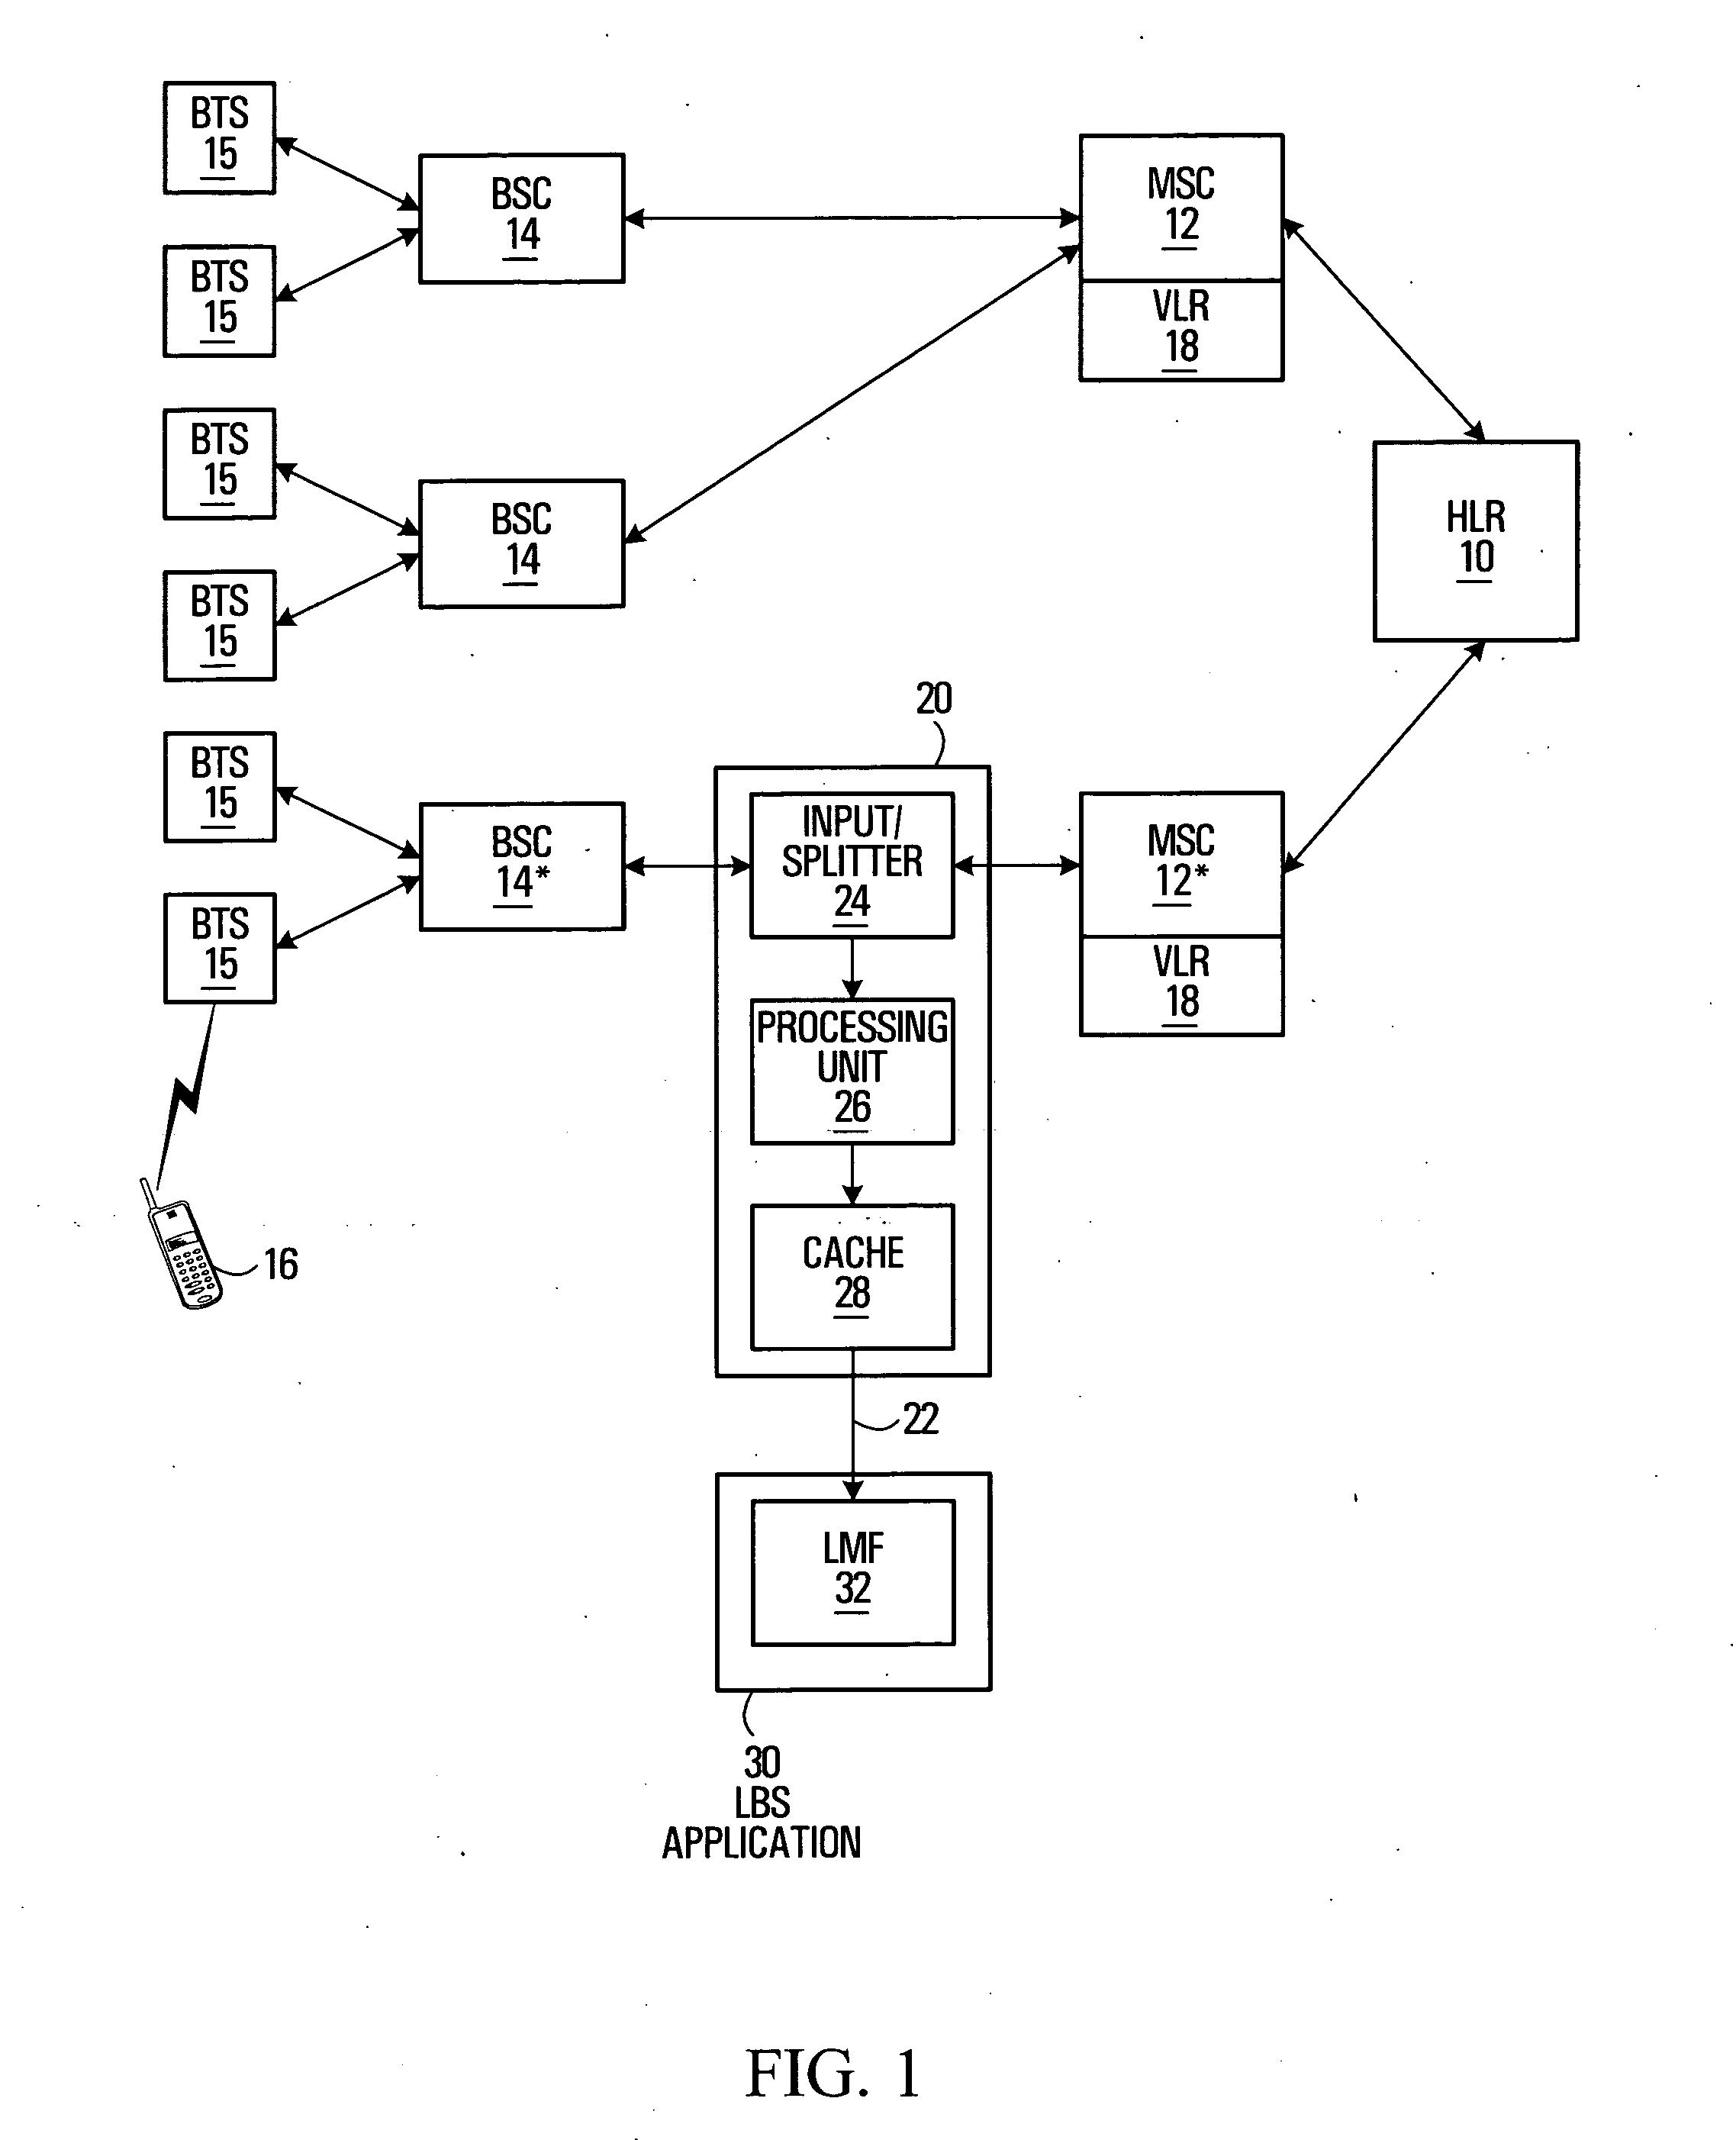 Apparatus and method for obtaining location information of mobile stations in a wireless communications network